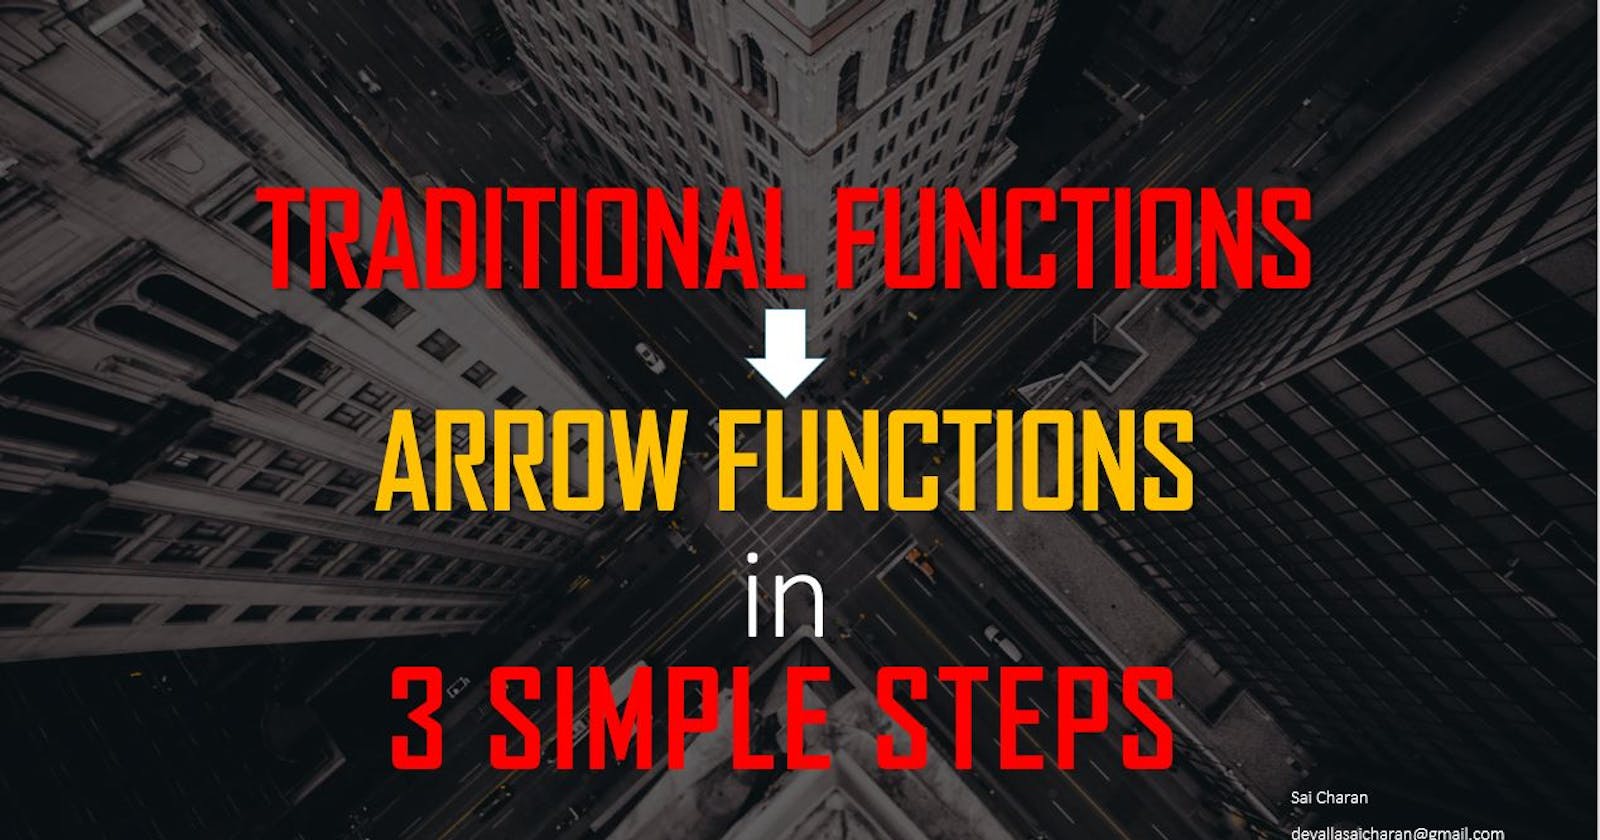 Convert Your Traditional Functions into Arrow Functions in 3 Simple Steps